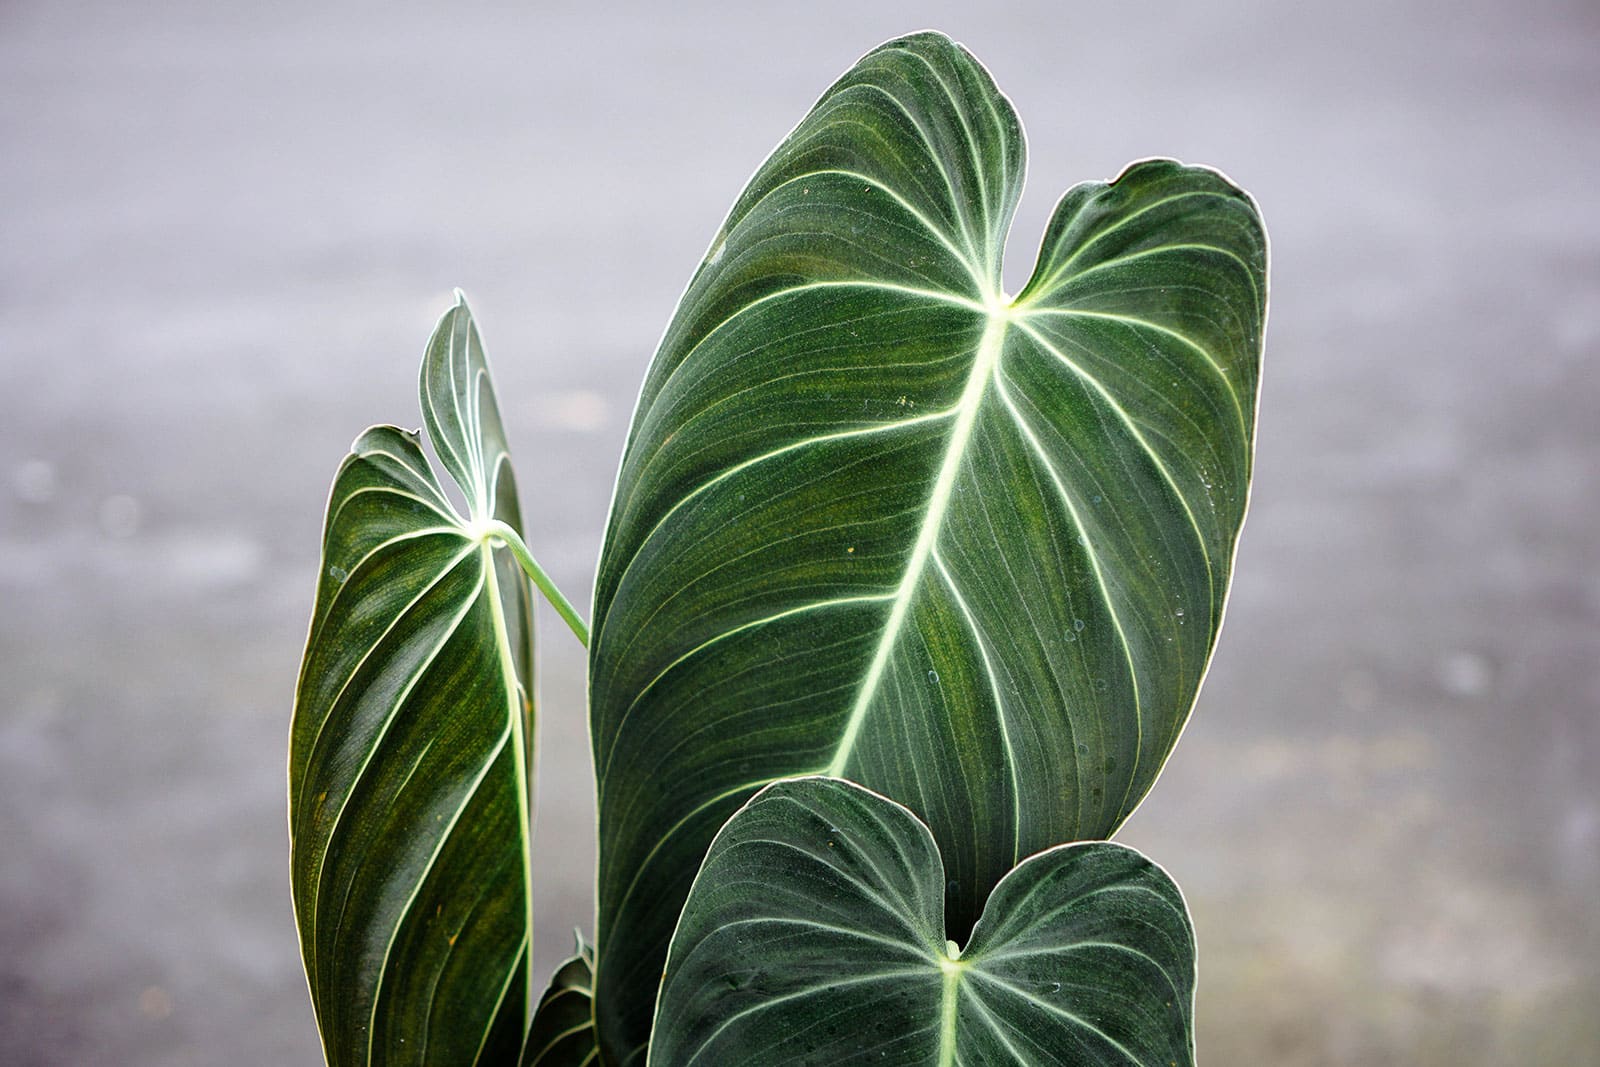 Dark green Philodendron melanochrysum leaves on a houseplant, shot against a gray background